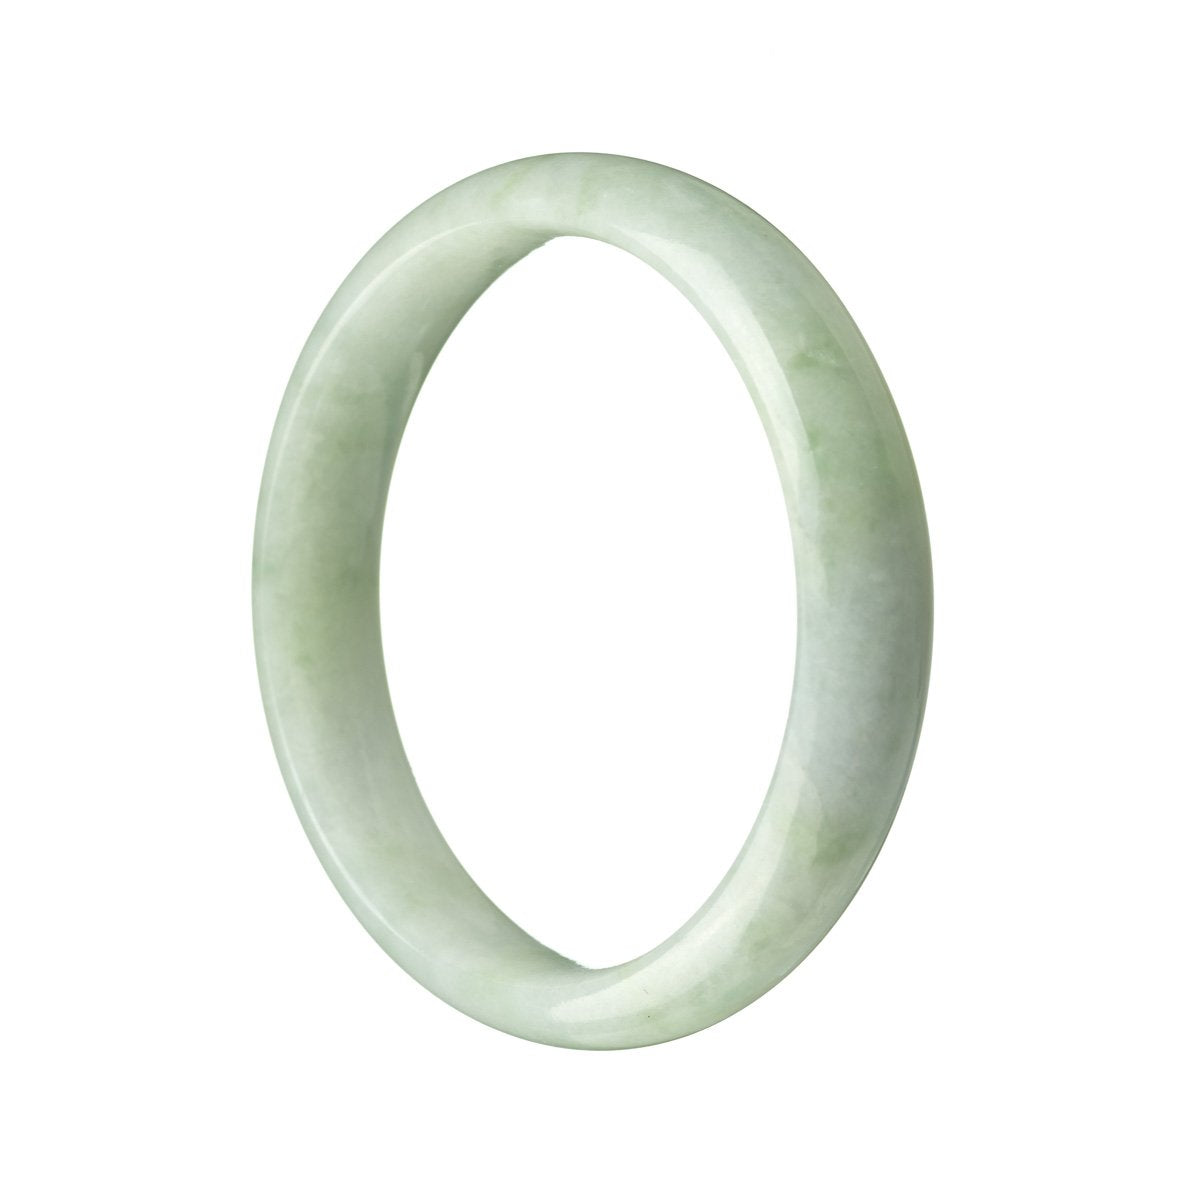 A close-up image of a light green jade bangle with a half-moon shape, measuring 57mm in diameter. The bangle is made of certified Grade A jade and is a product of the brand MAYS™.